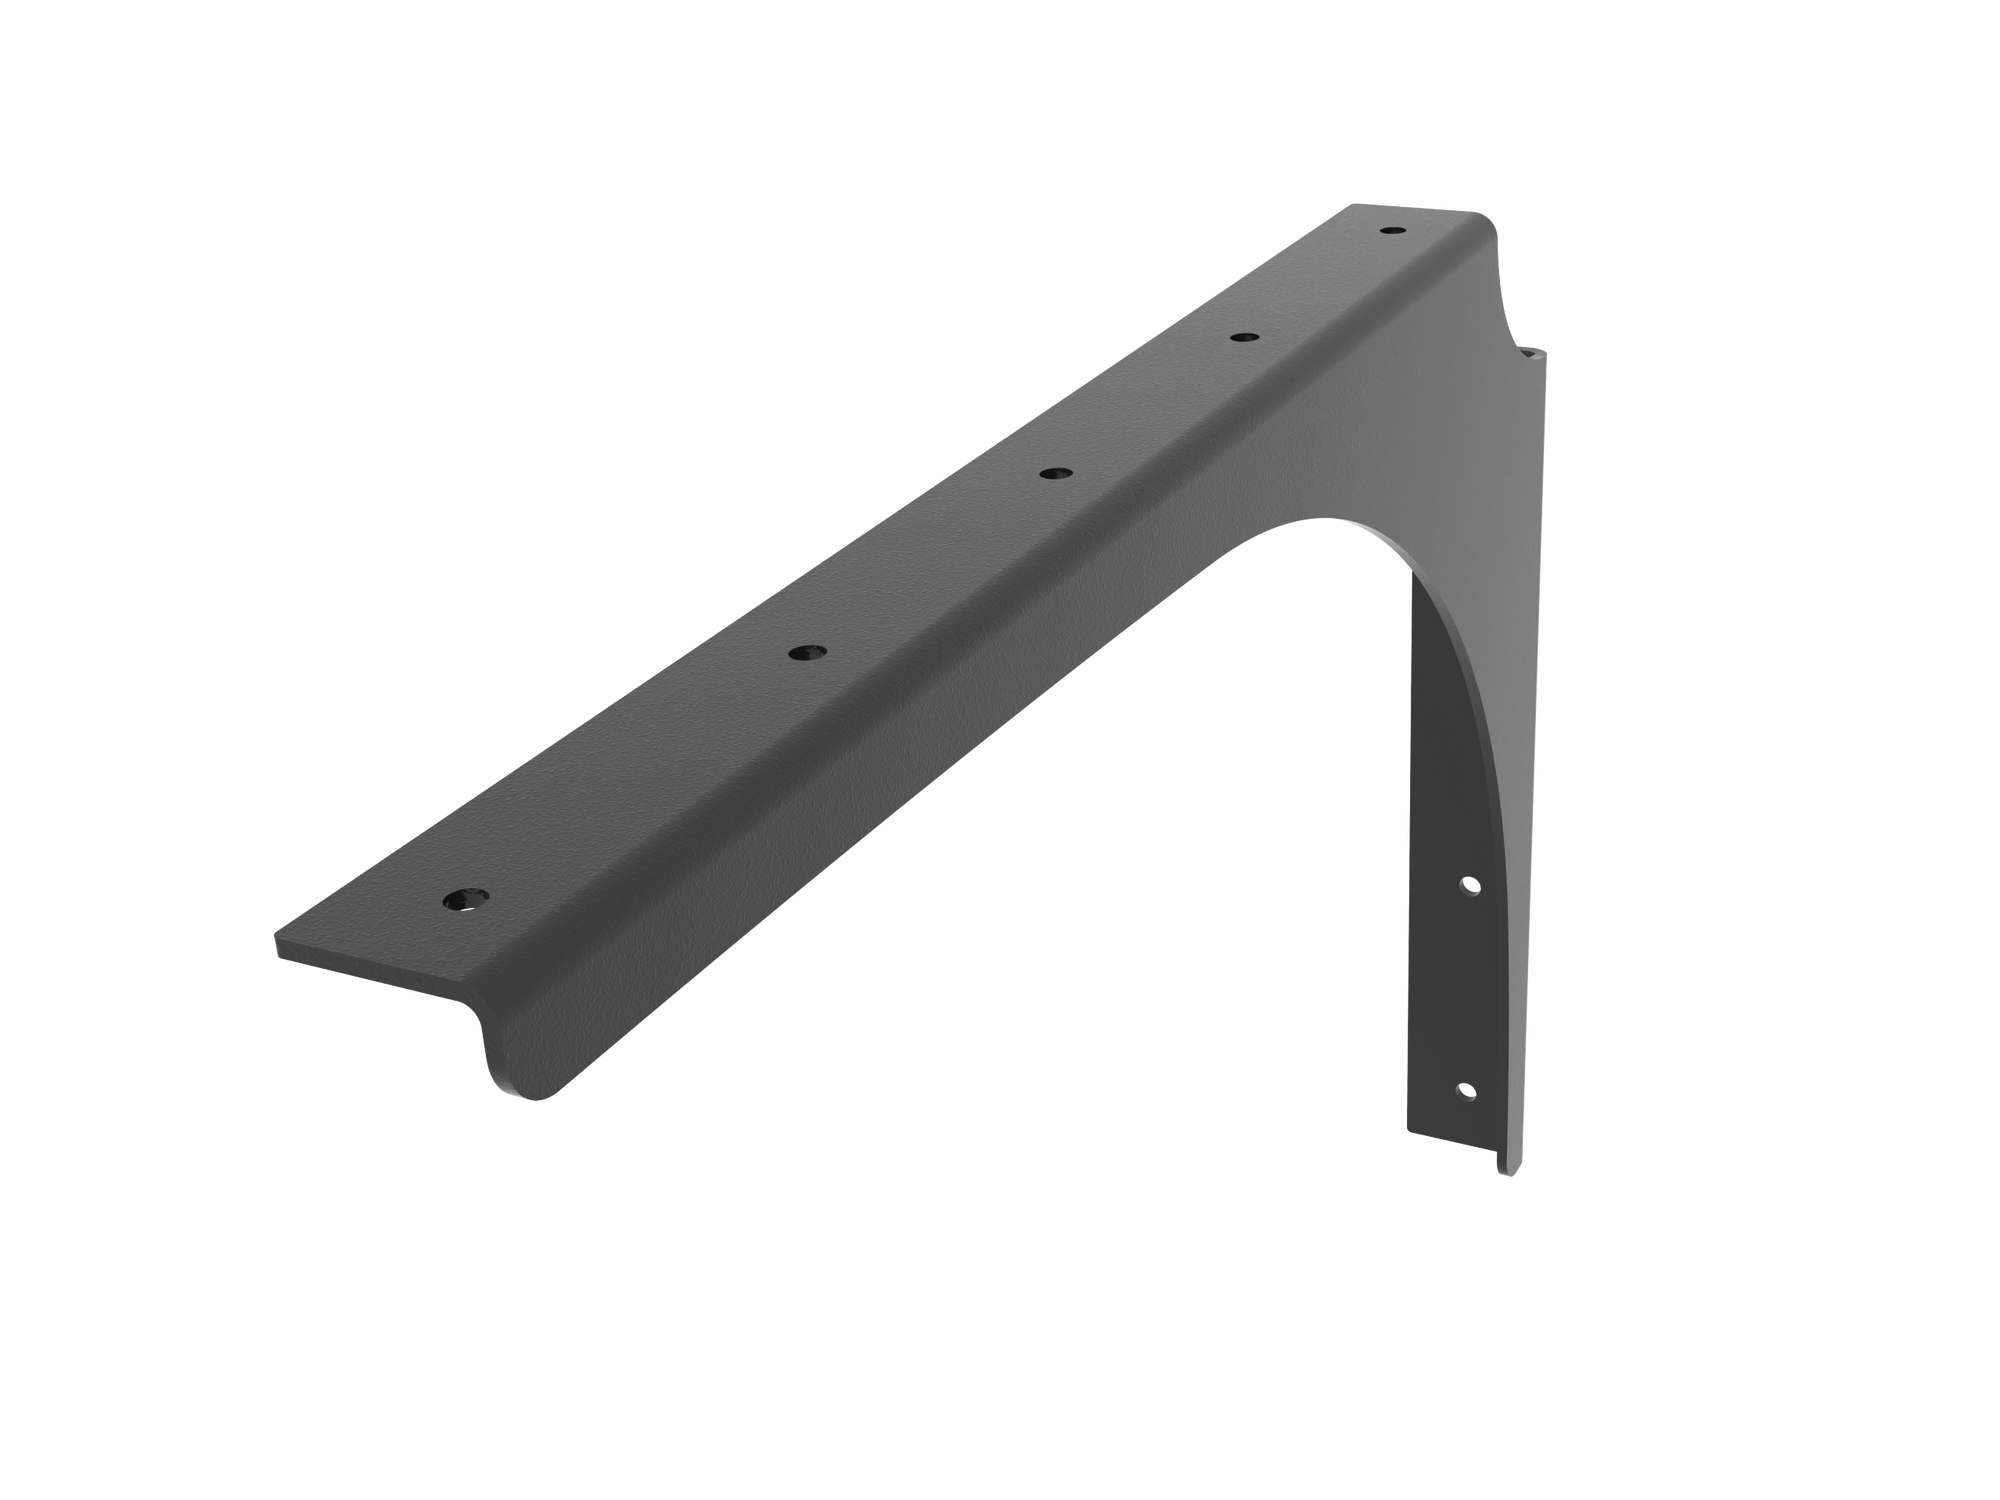 Universal Commercial Support Bracket - 18" x 12" Right with Black Powder Coat Finish. Supports floating ADA-compliant vanities, desks, shelving, countertops, and more.